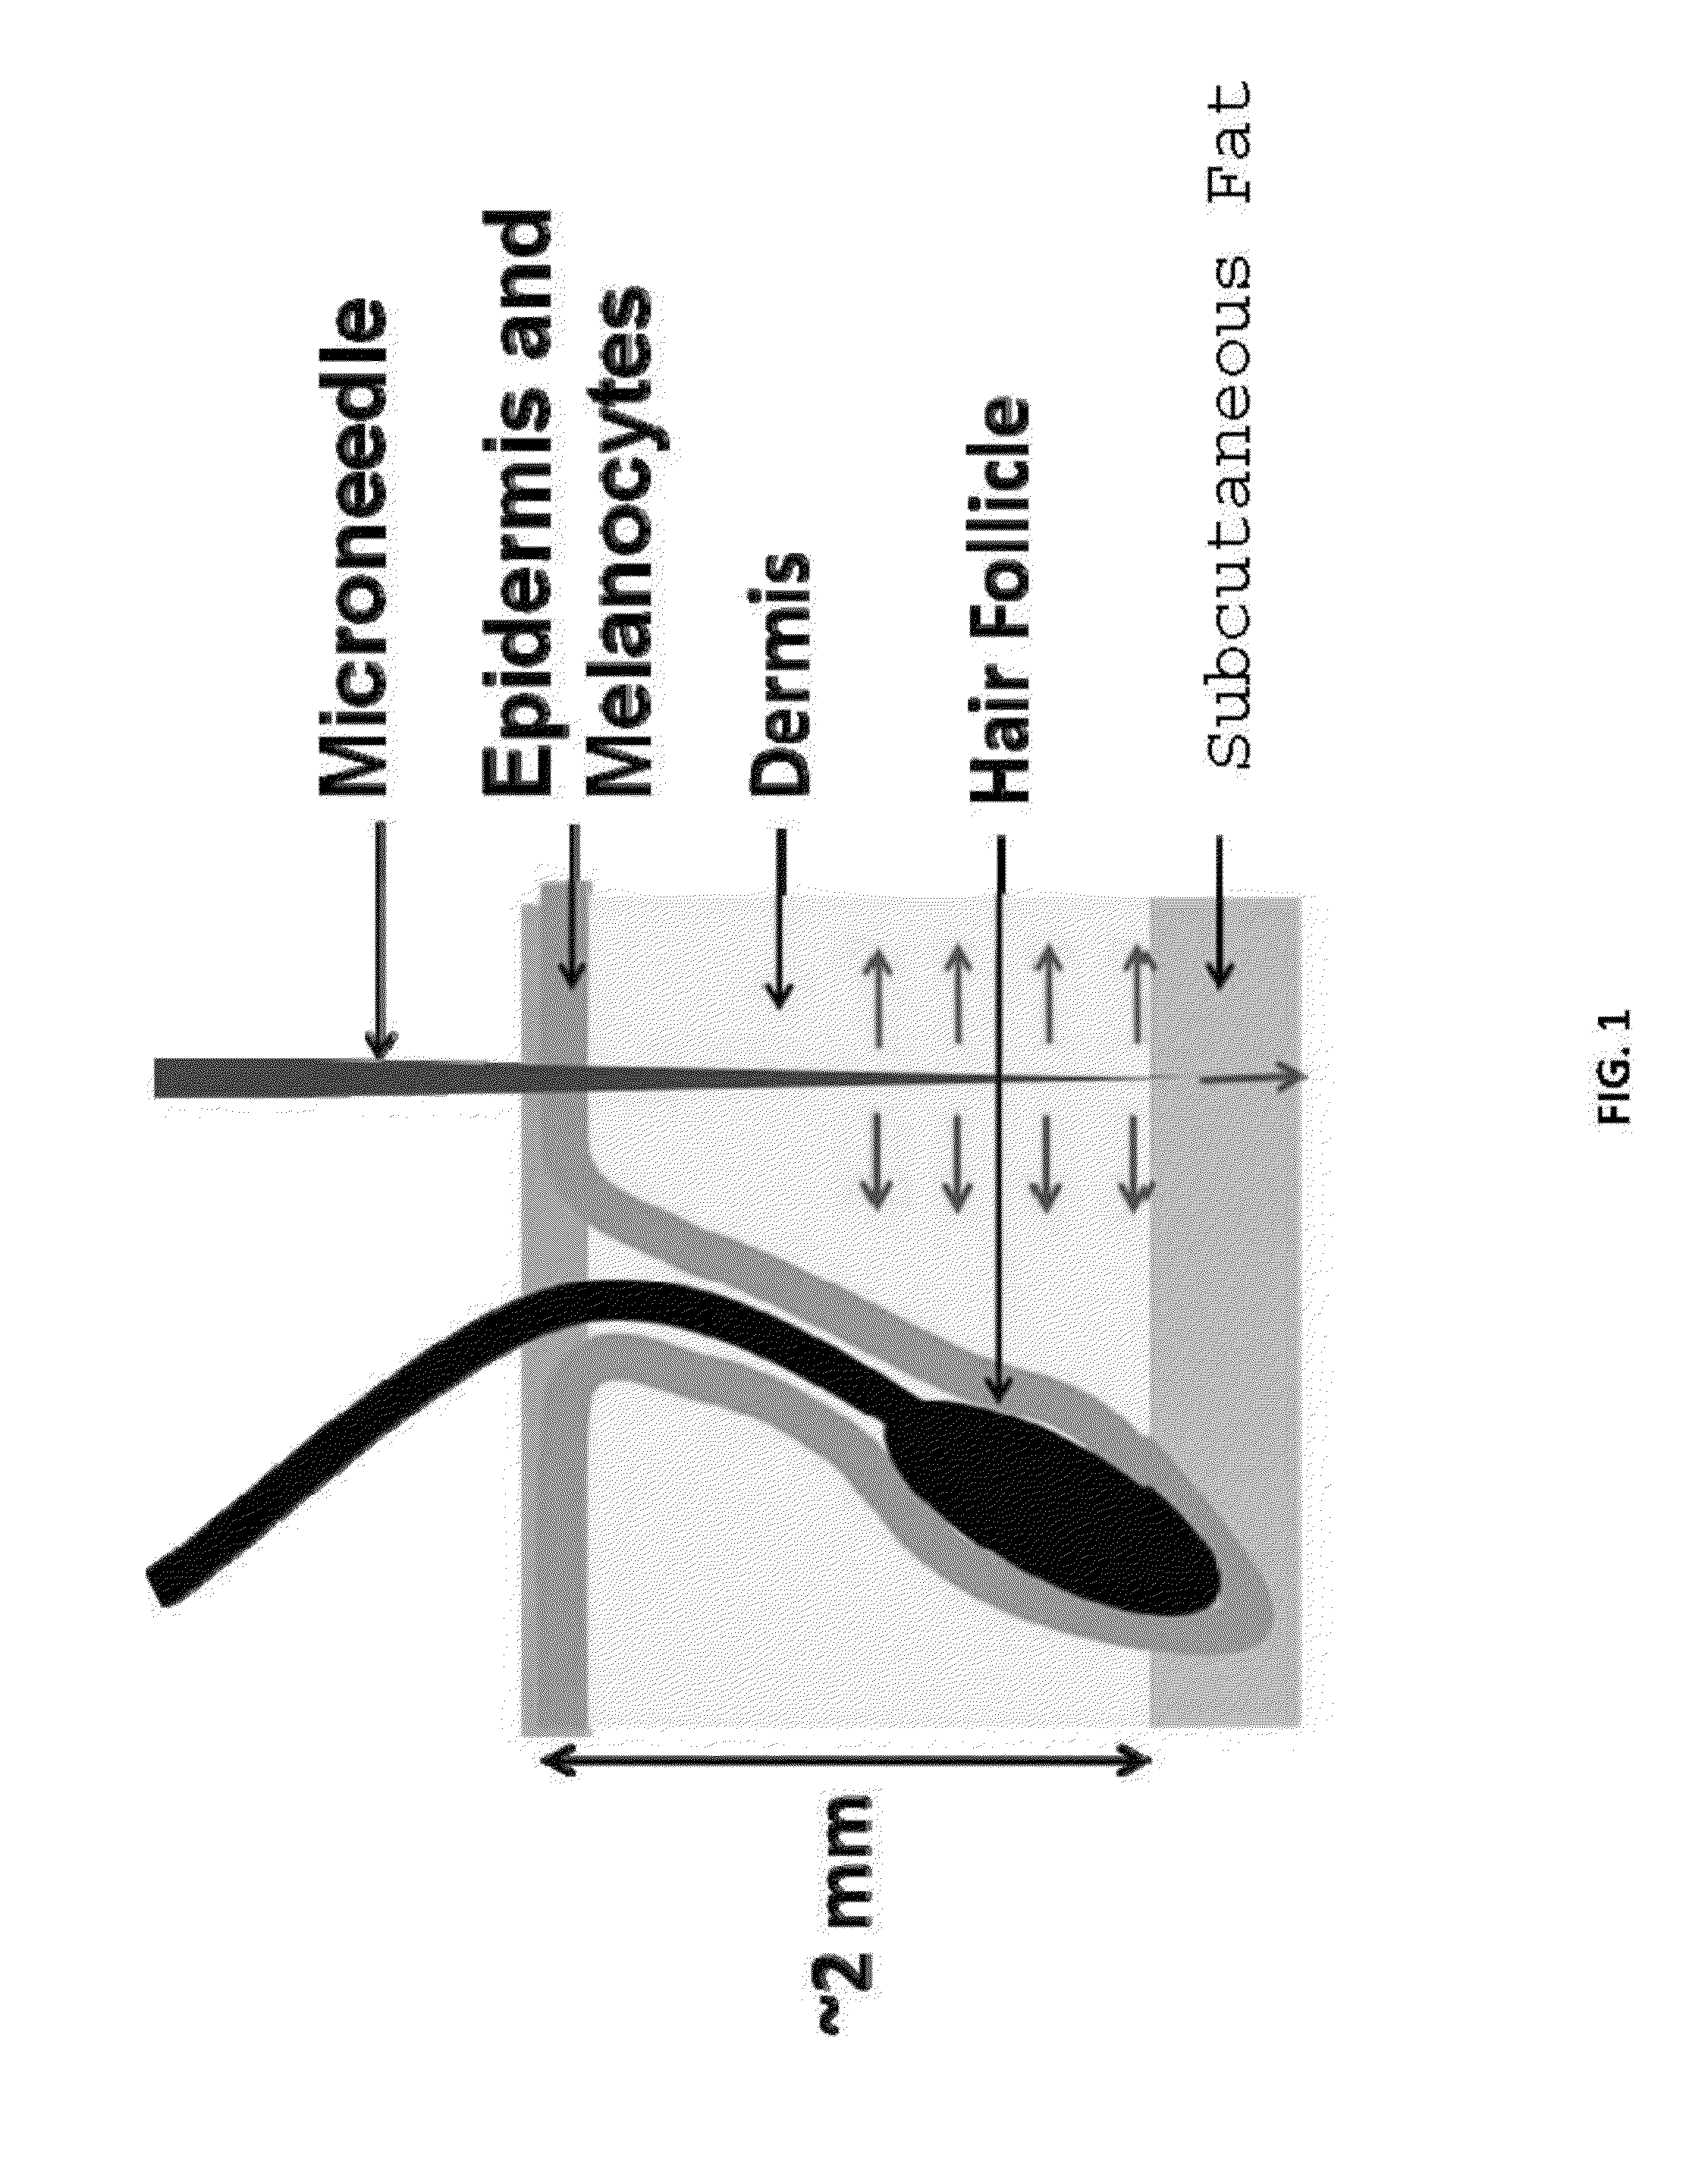 Fiber array for optical imaging and therapeutics